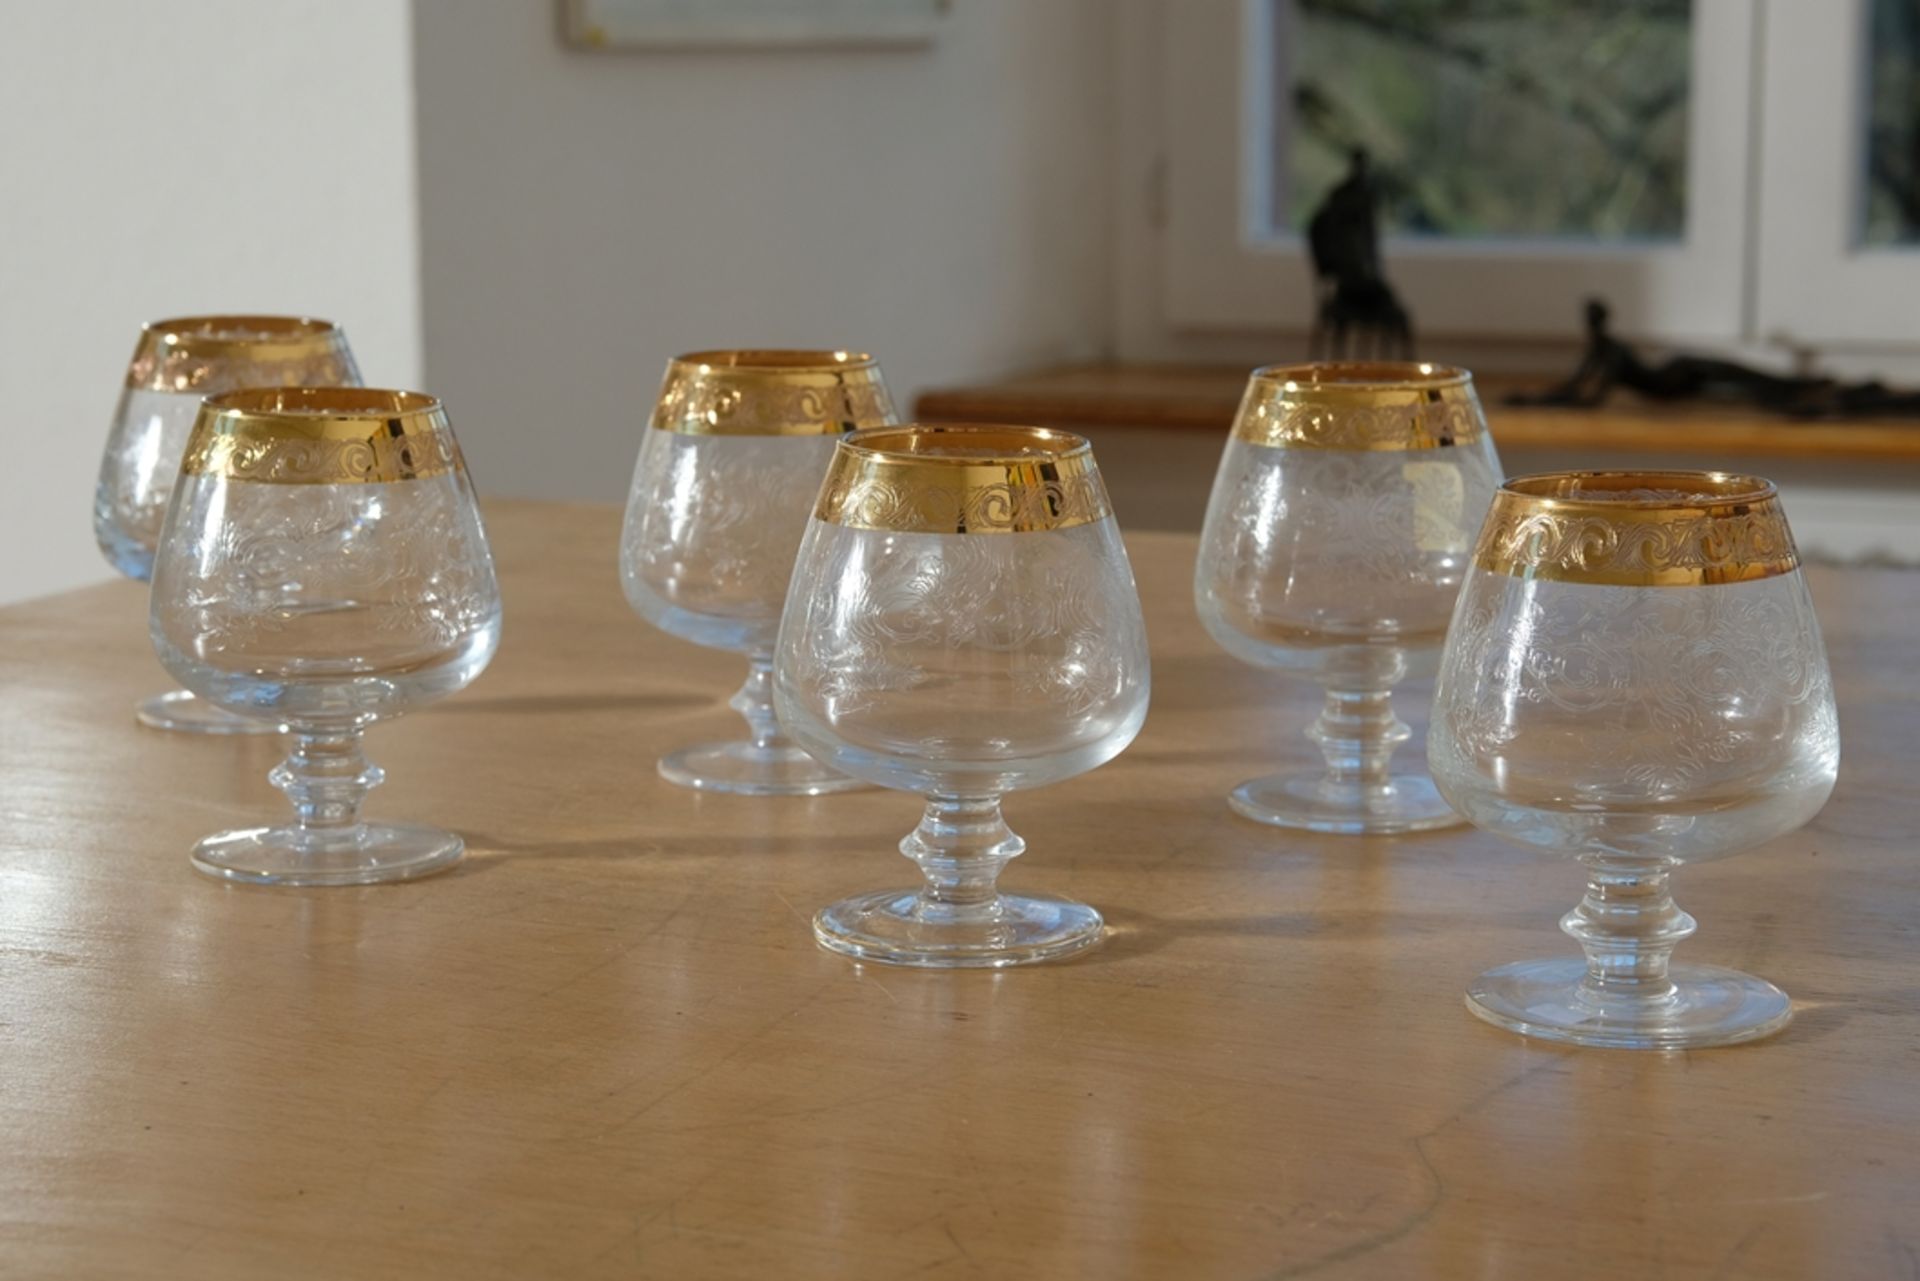 Murano Medici gold rim, six cognac glasses, crystal glass engraved with plant motifs.